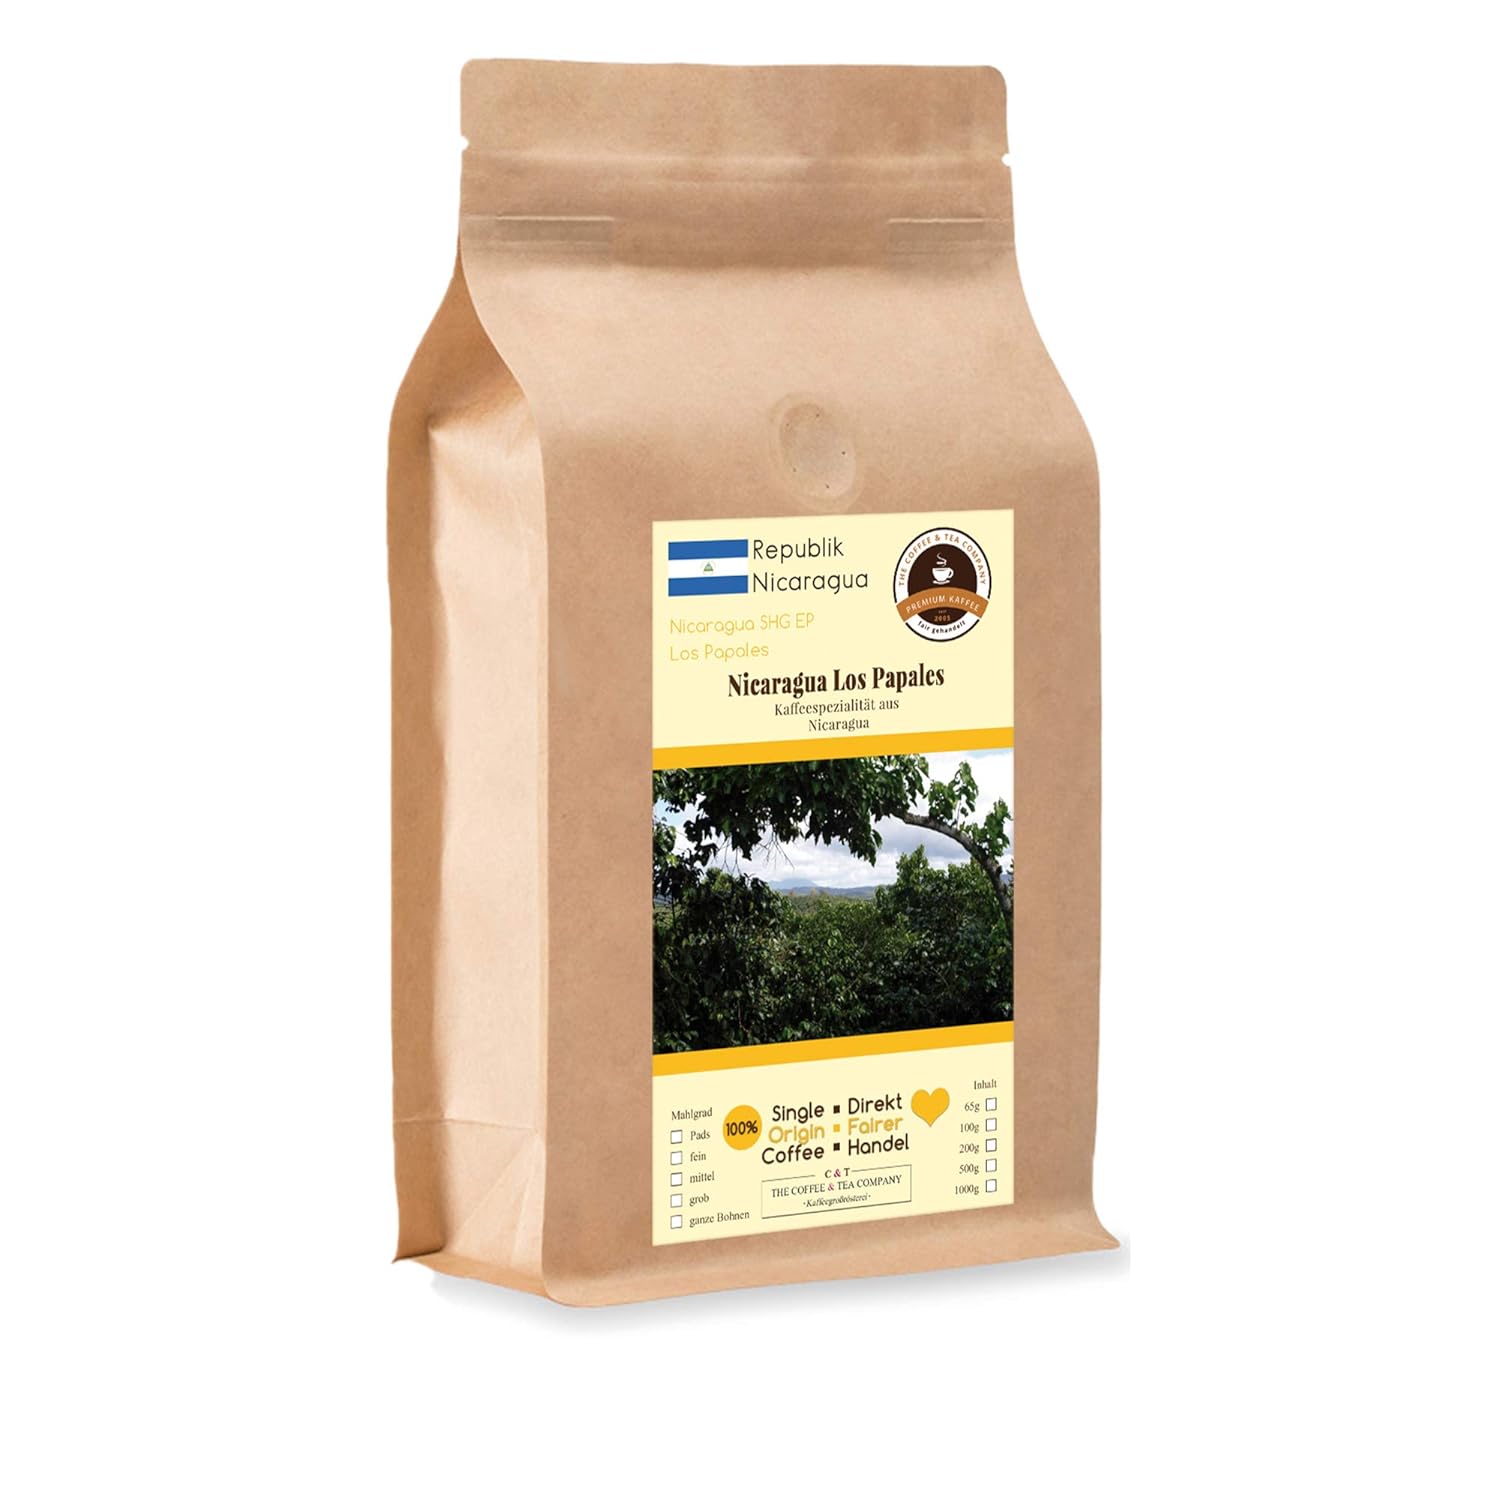 Coffee Globetrotter - Coffee With Heart - Nicaragua Los Papales - 500 g Finely Ground - for Espresso Maker, Espresso Machine - Top Coffee Fair Trade Supports Social Projects